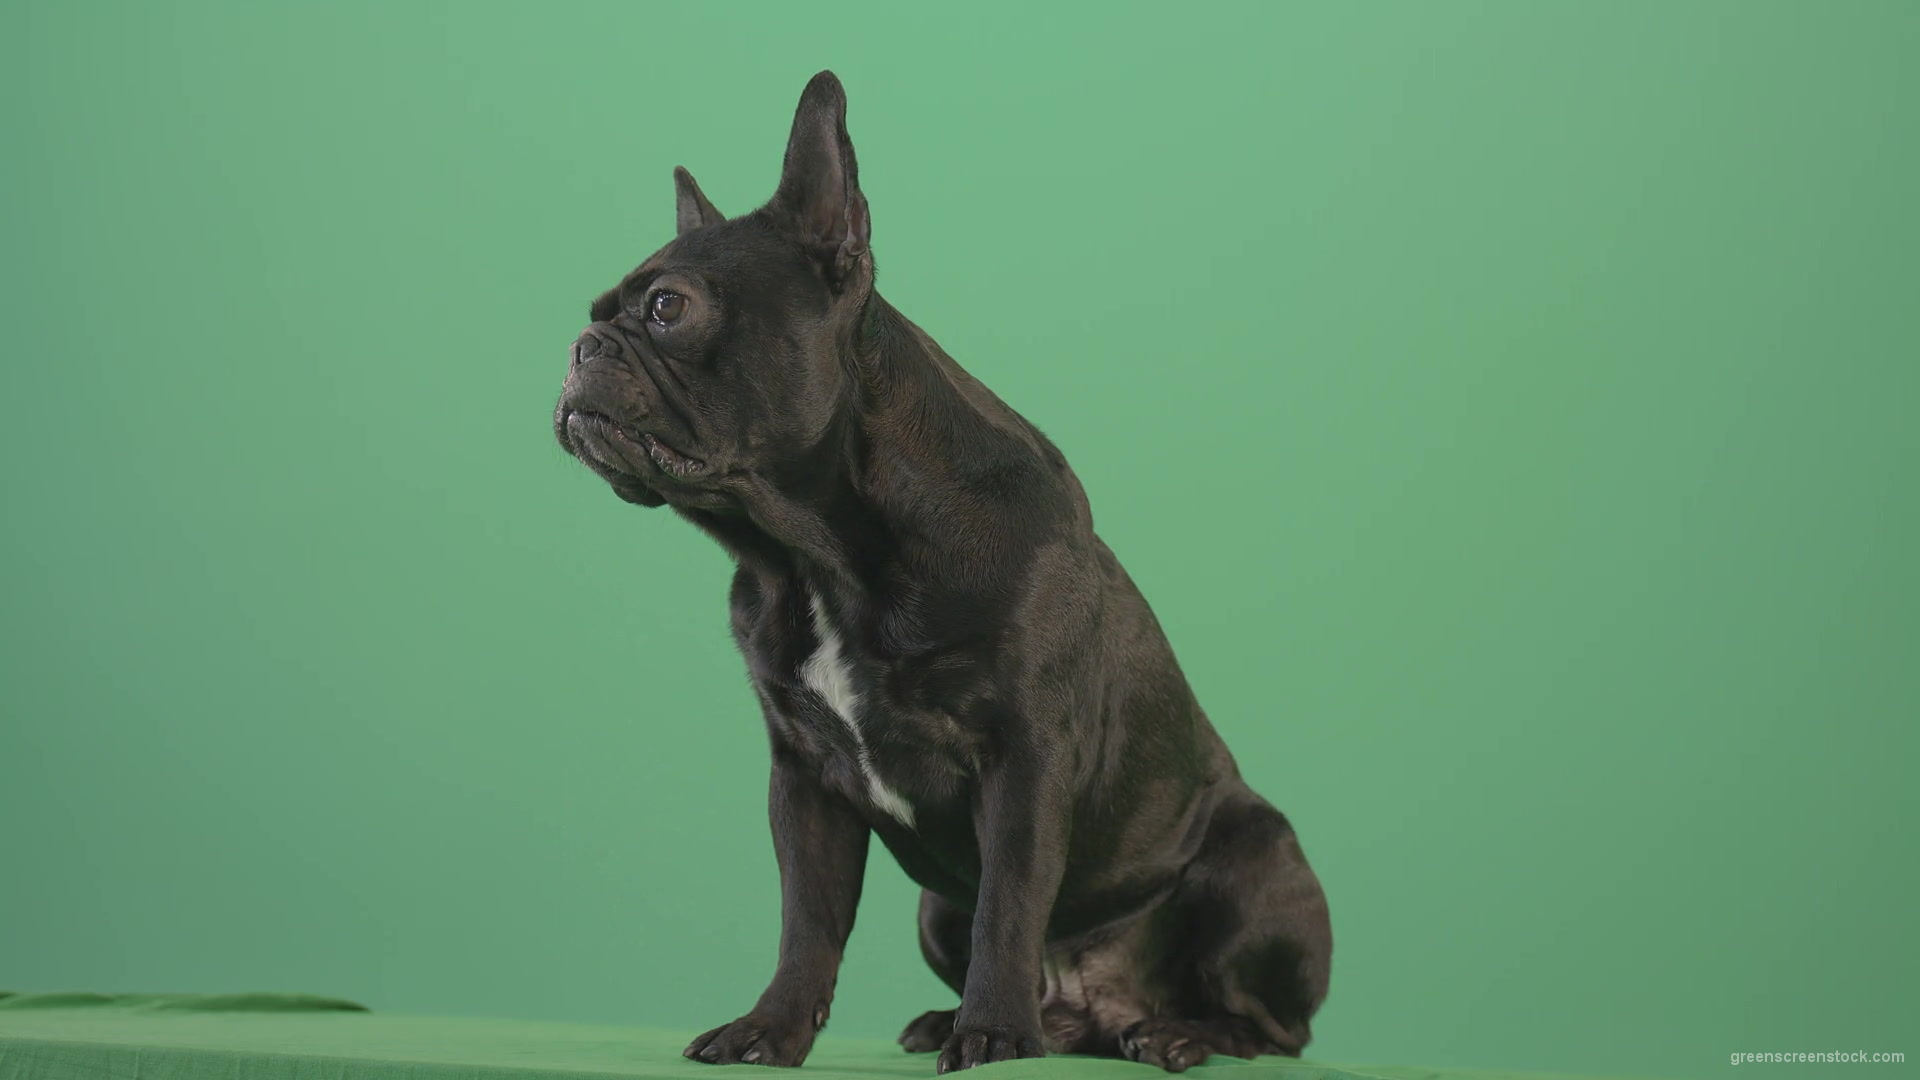 Angra-French-bulldog-black-toy-dog-watch-enemy-over-green-screen-4K-Video-Footage-1920_007 Green Screen Stock